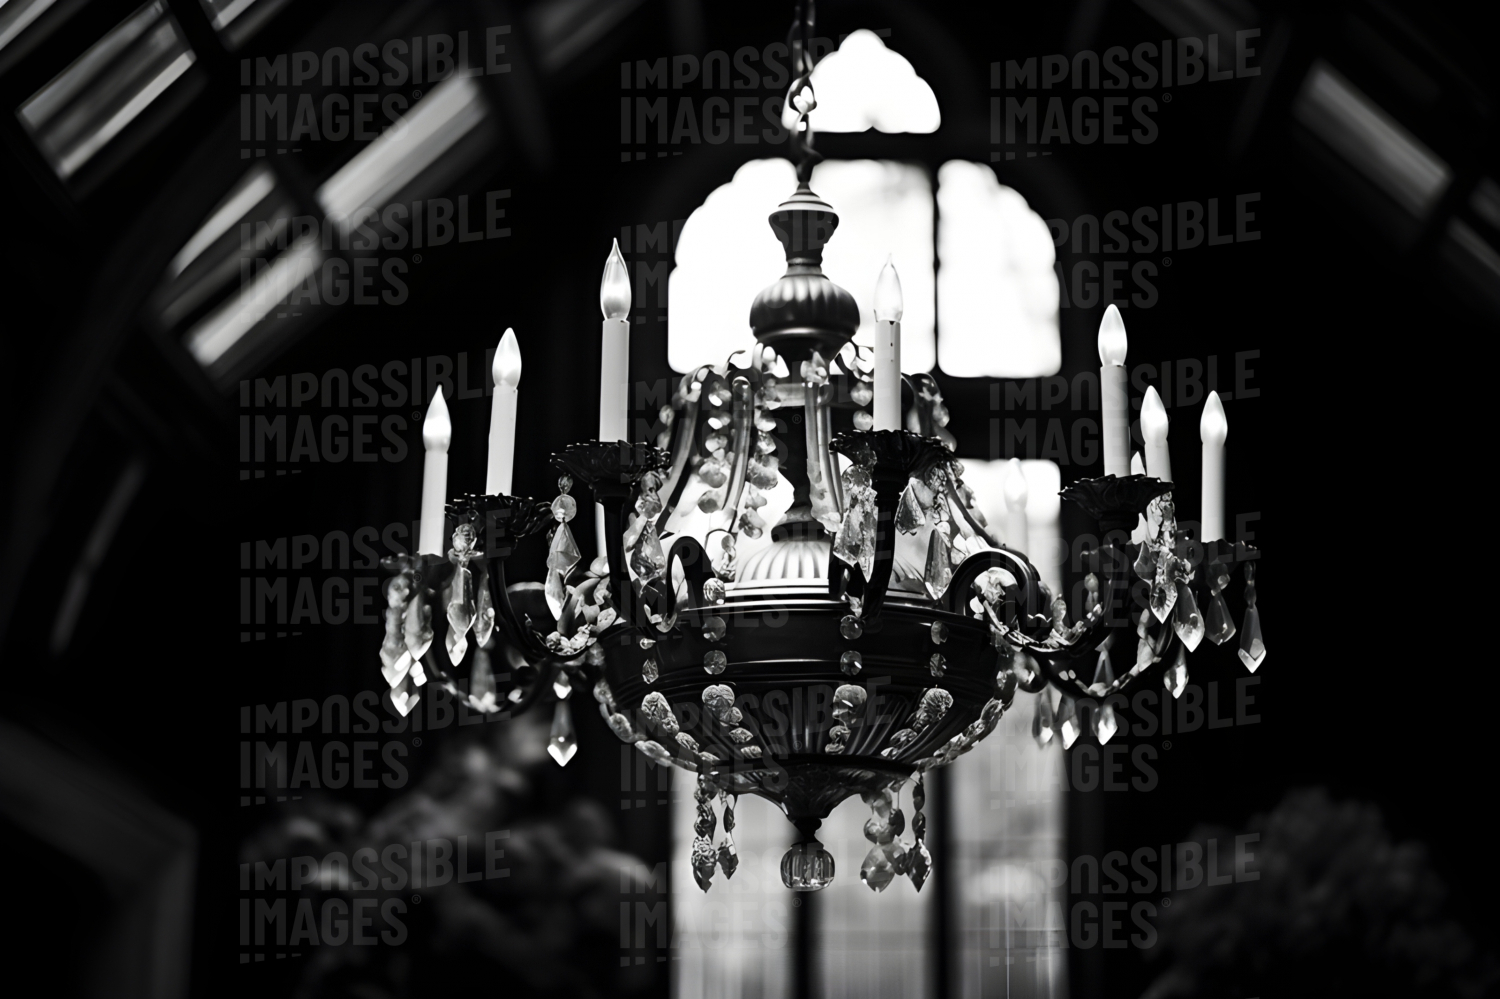 High contrastblack and white photo of an ornate chandelier hanging in the halway of a stately home - 